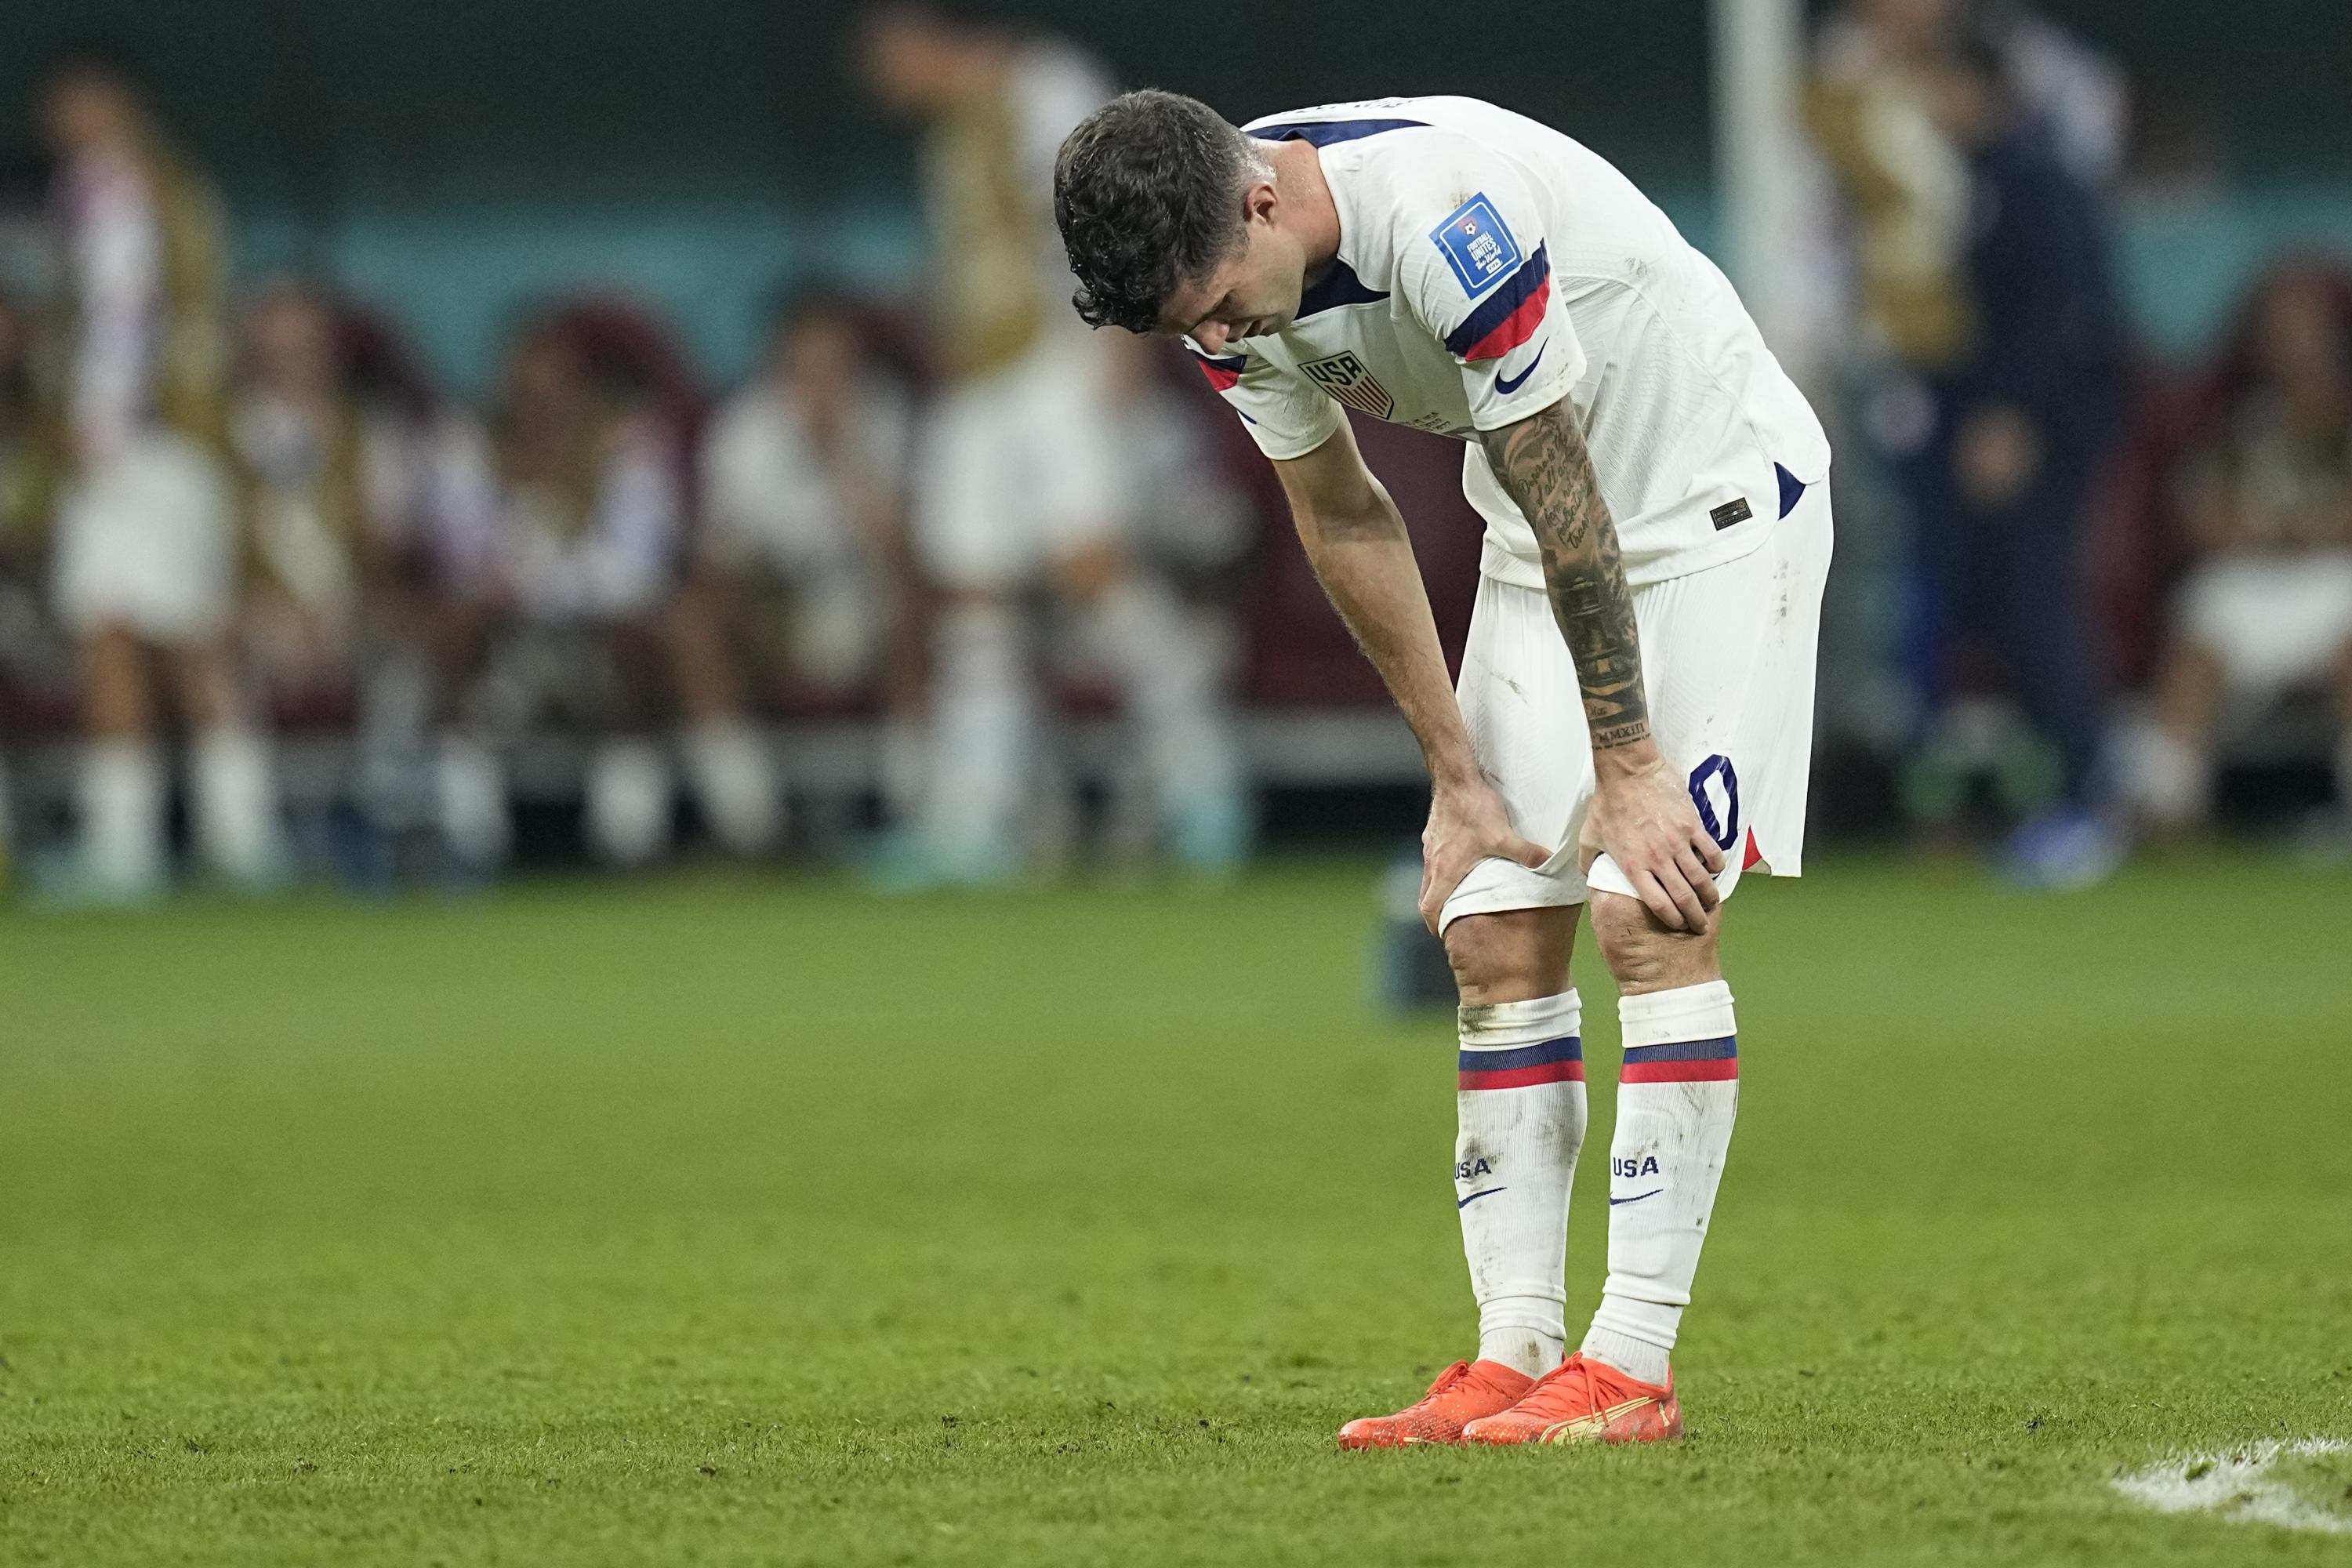 USMNT knocked out of World Cup in round of 16 by clinical